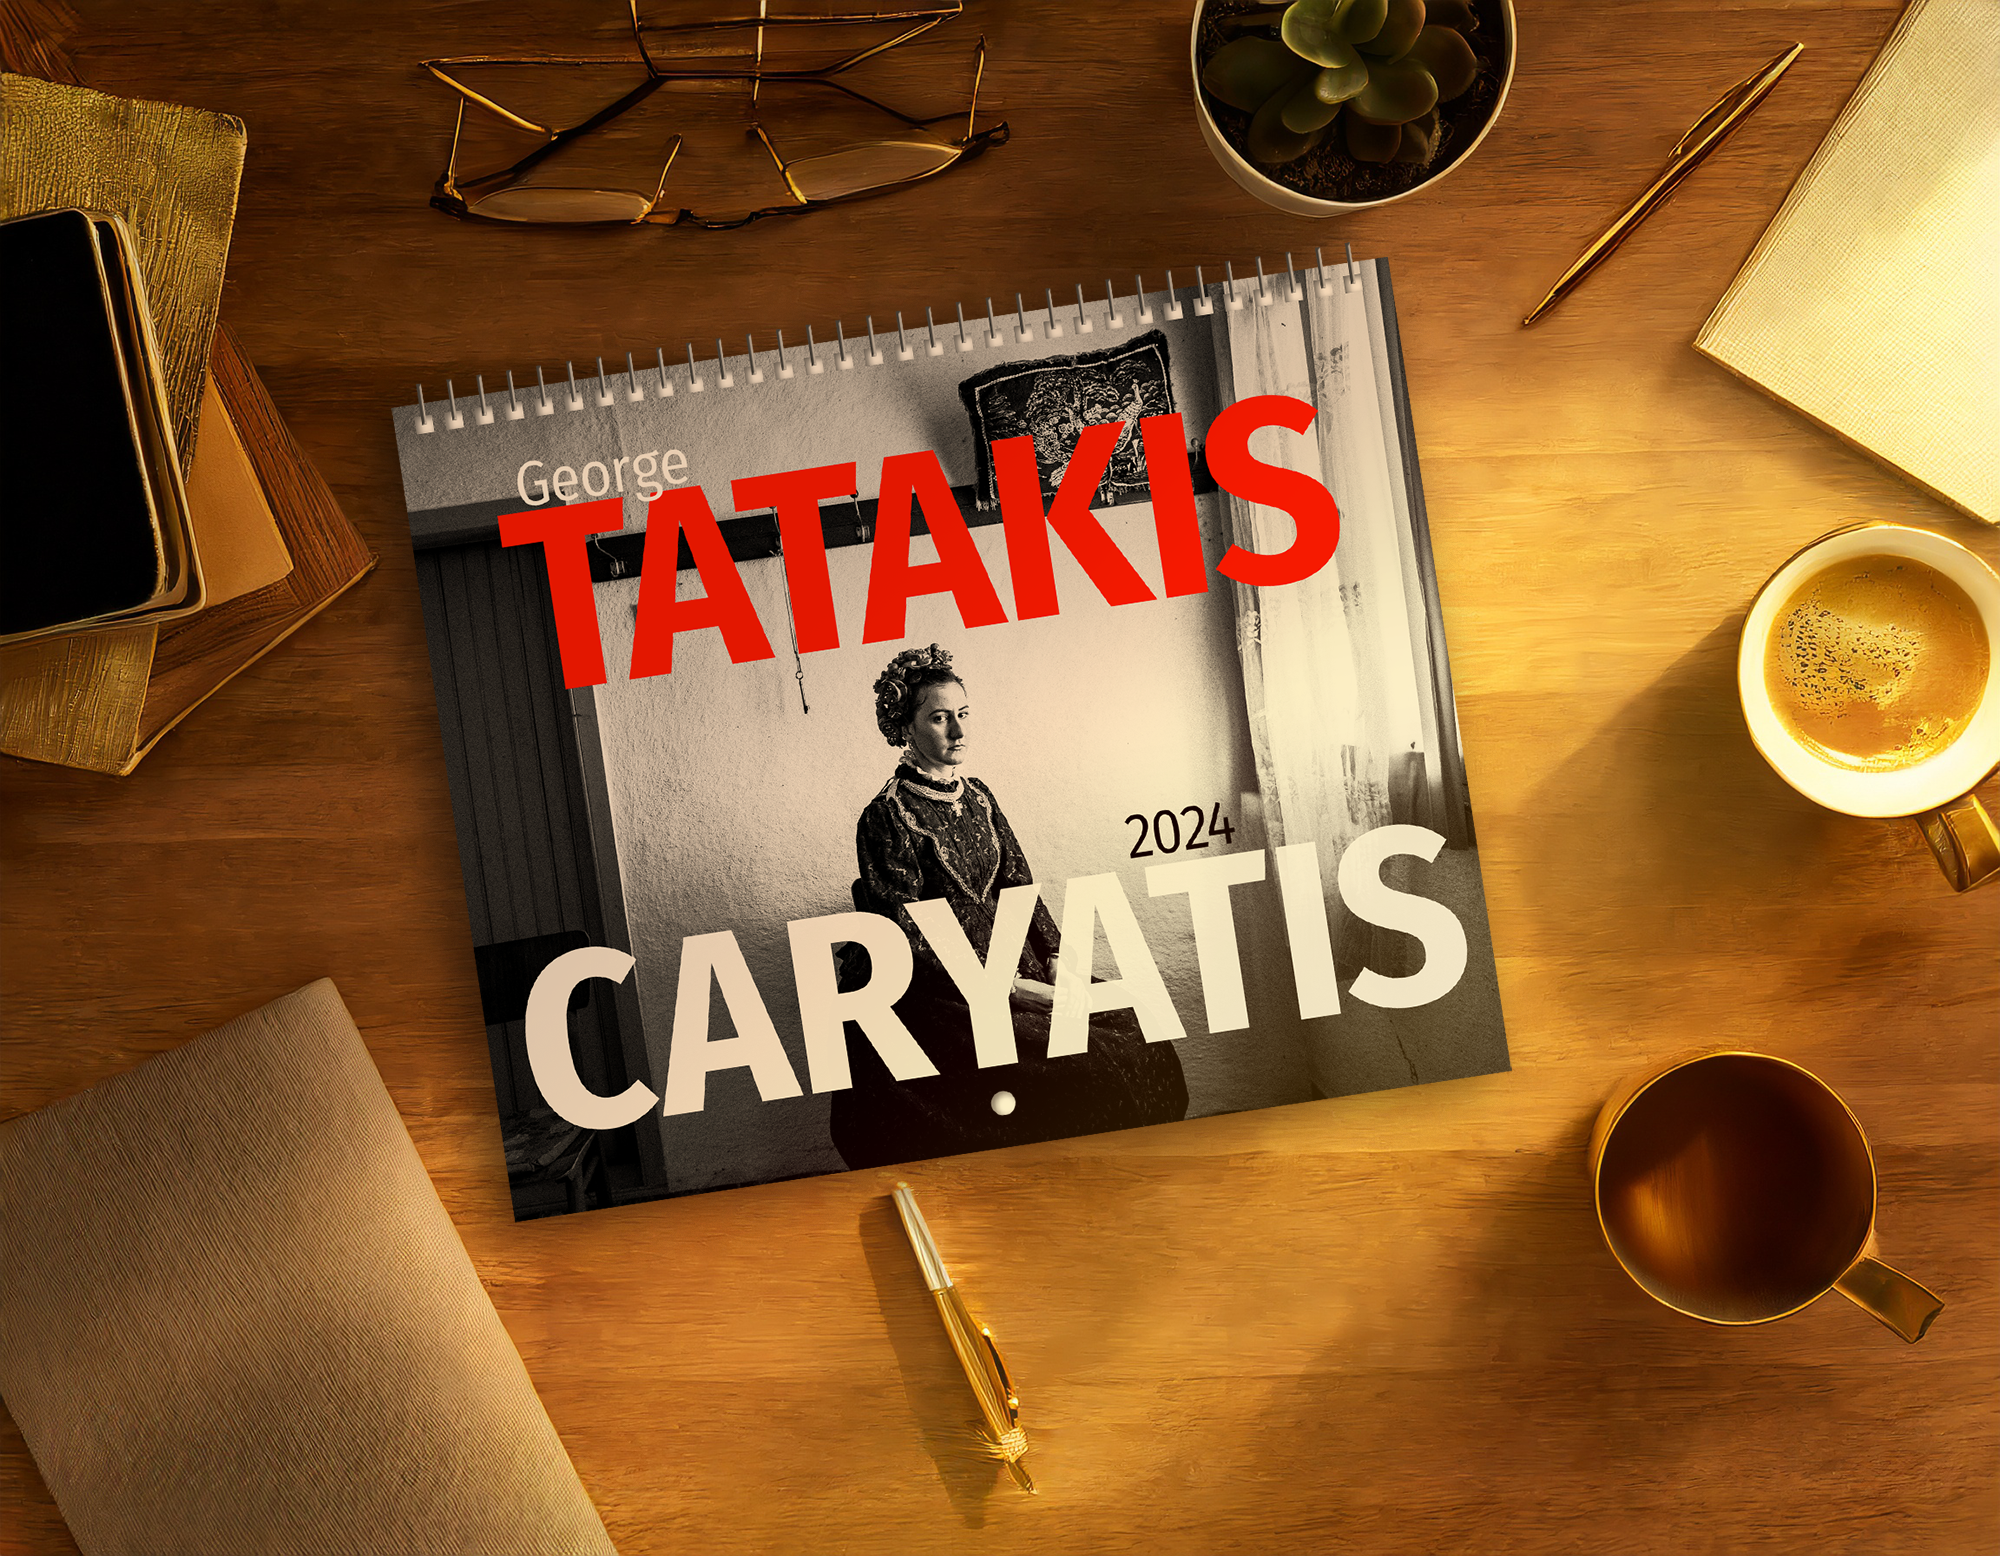 George Tatakis' Caryatis Calendar 2024 | 12 Months of Captivating Greek Heritage in Black & White - front cover on desk